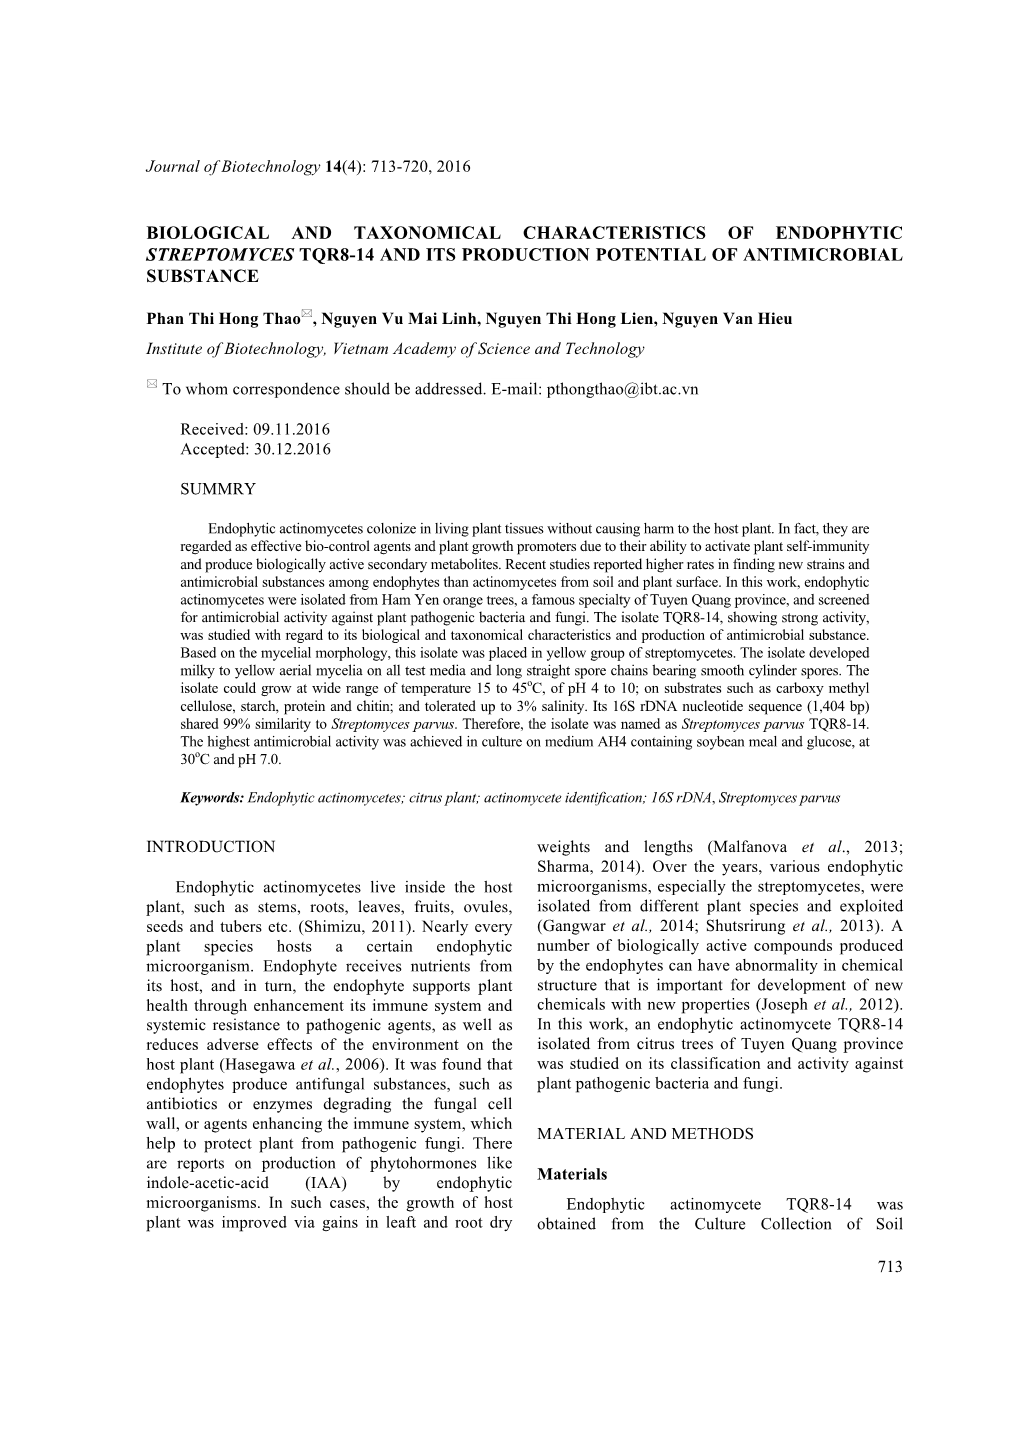 Biological and Taxonomical Characteristics of Endophytic Streptomyces Tqr8-14 and Its Production Potential of Antimicrobial Substance